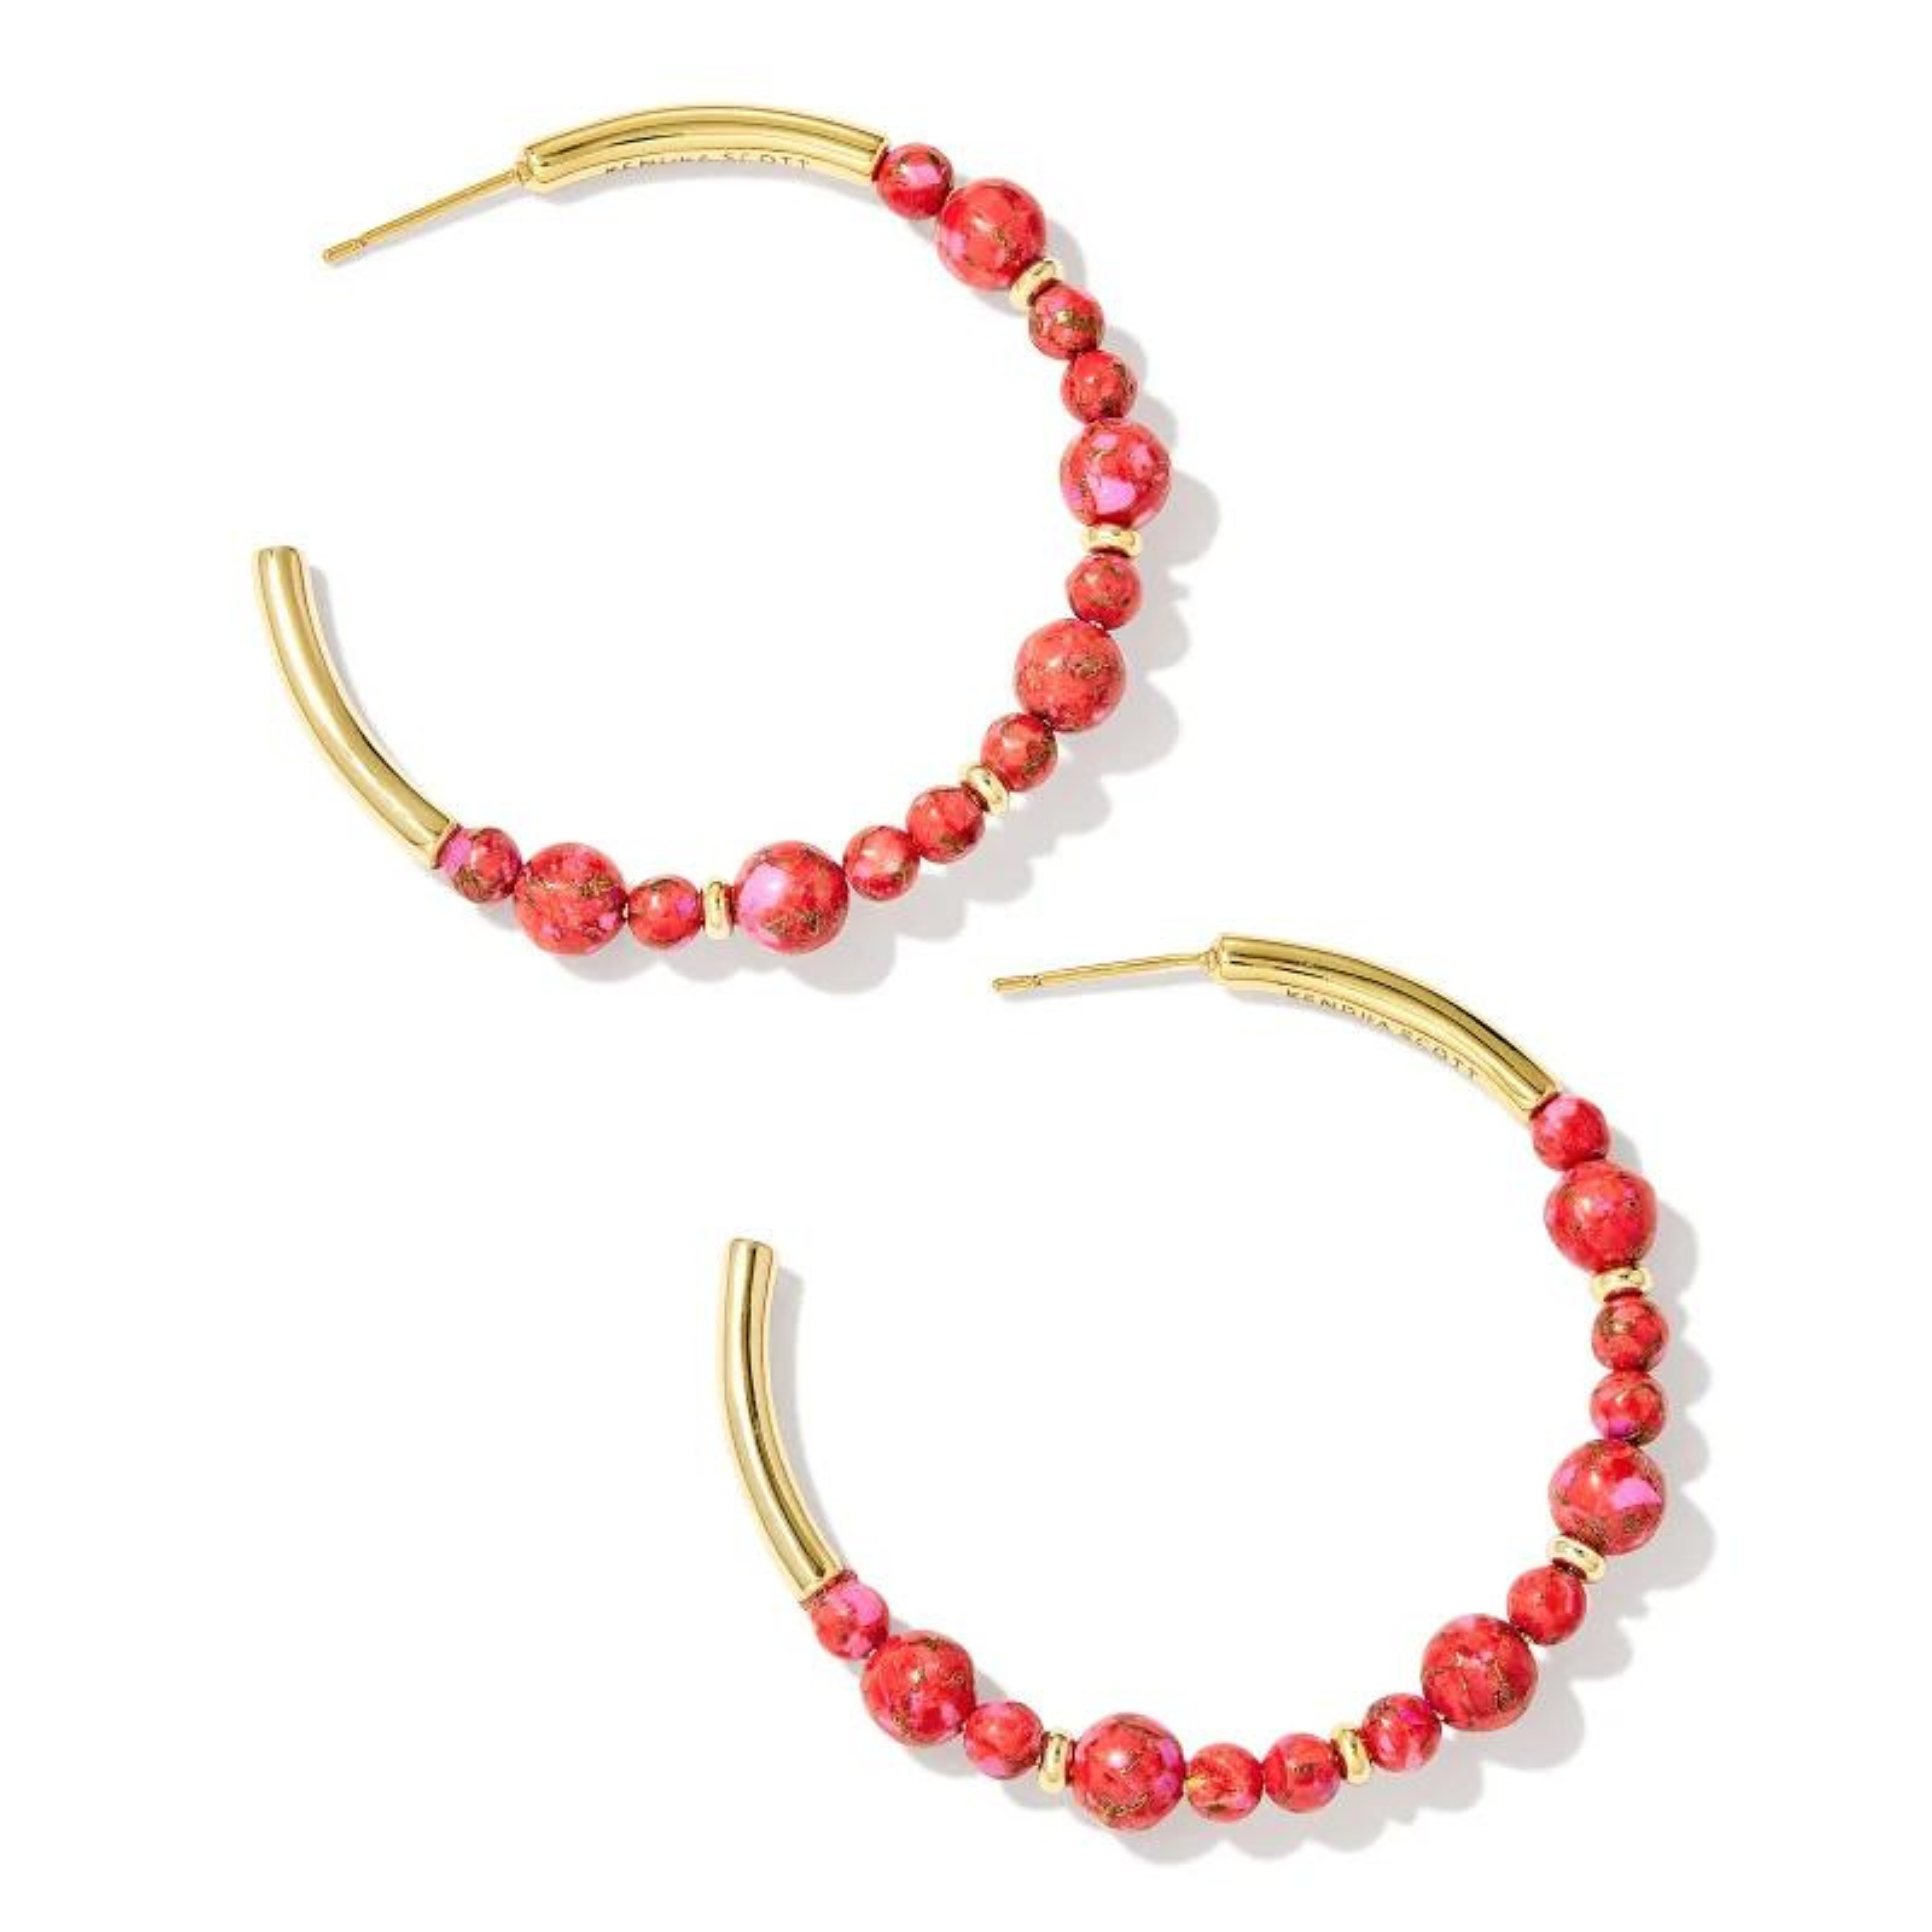 Gold hoop earrings with red marble beads in varying sizes. These earrings are pictured on a white background. 